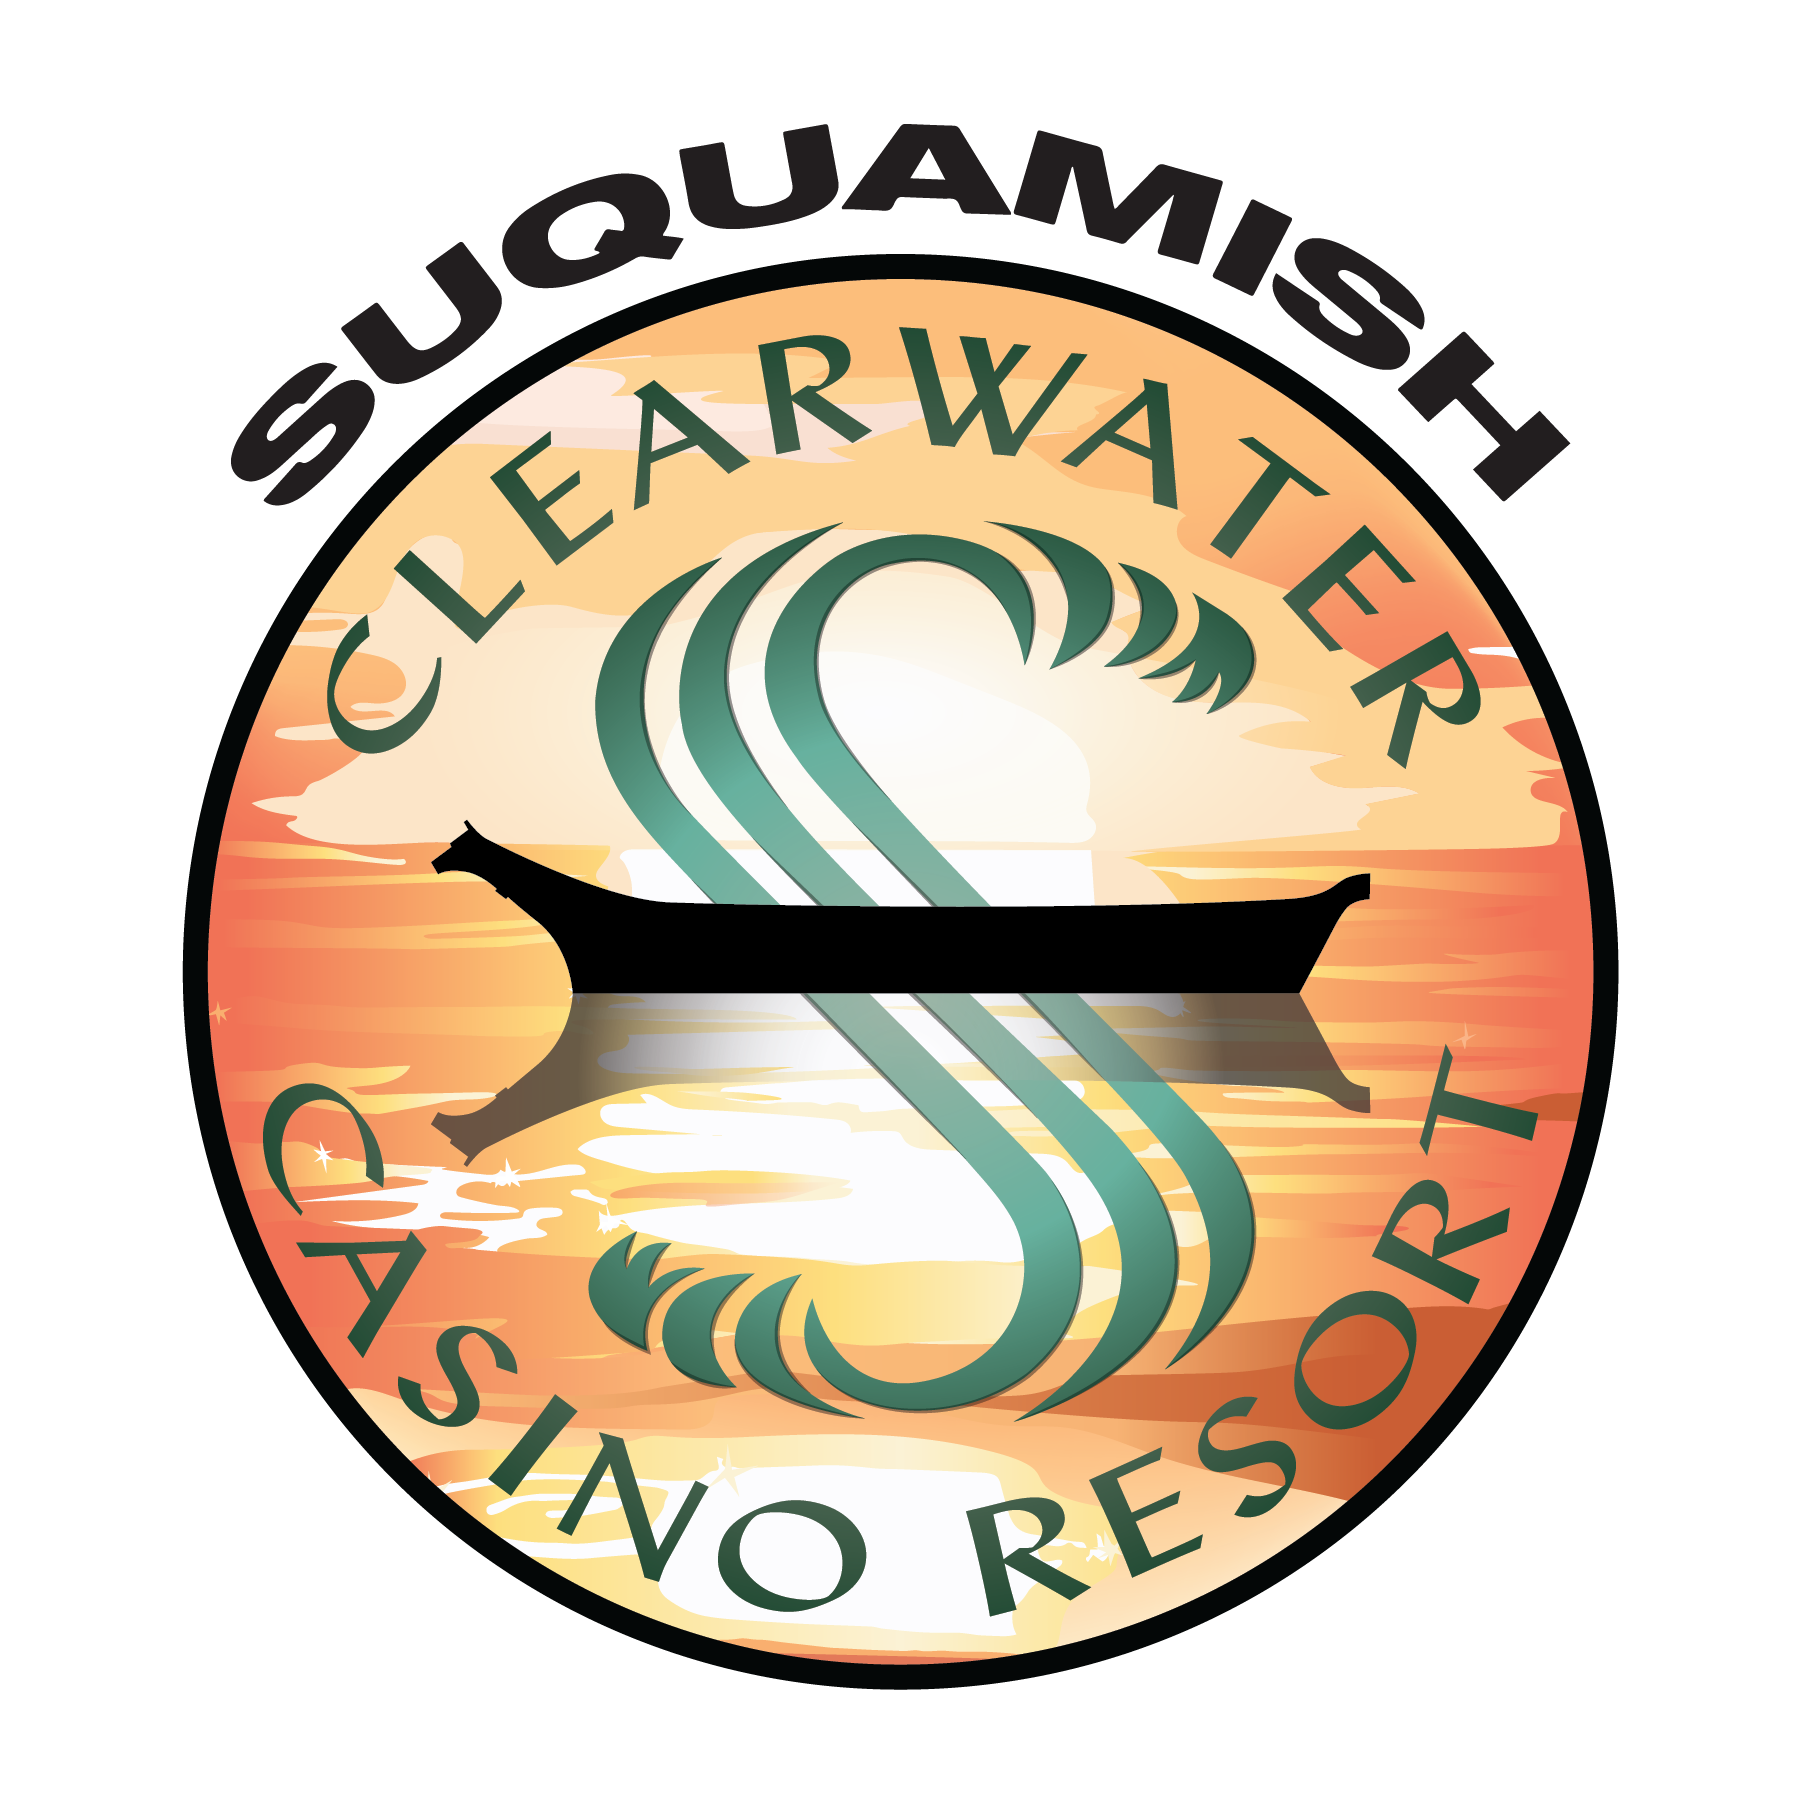 Suqamish Clearwater Casino Resort logo. A gold circle with the word Squamish above. Inside the circle along the top arc it says Clearwater. The bottom arc says Casino Resort. In the middle of the circle is a simple image of a black canoe on water with a silhouette. Woven through the canoe is the letter S.